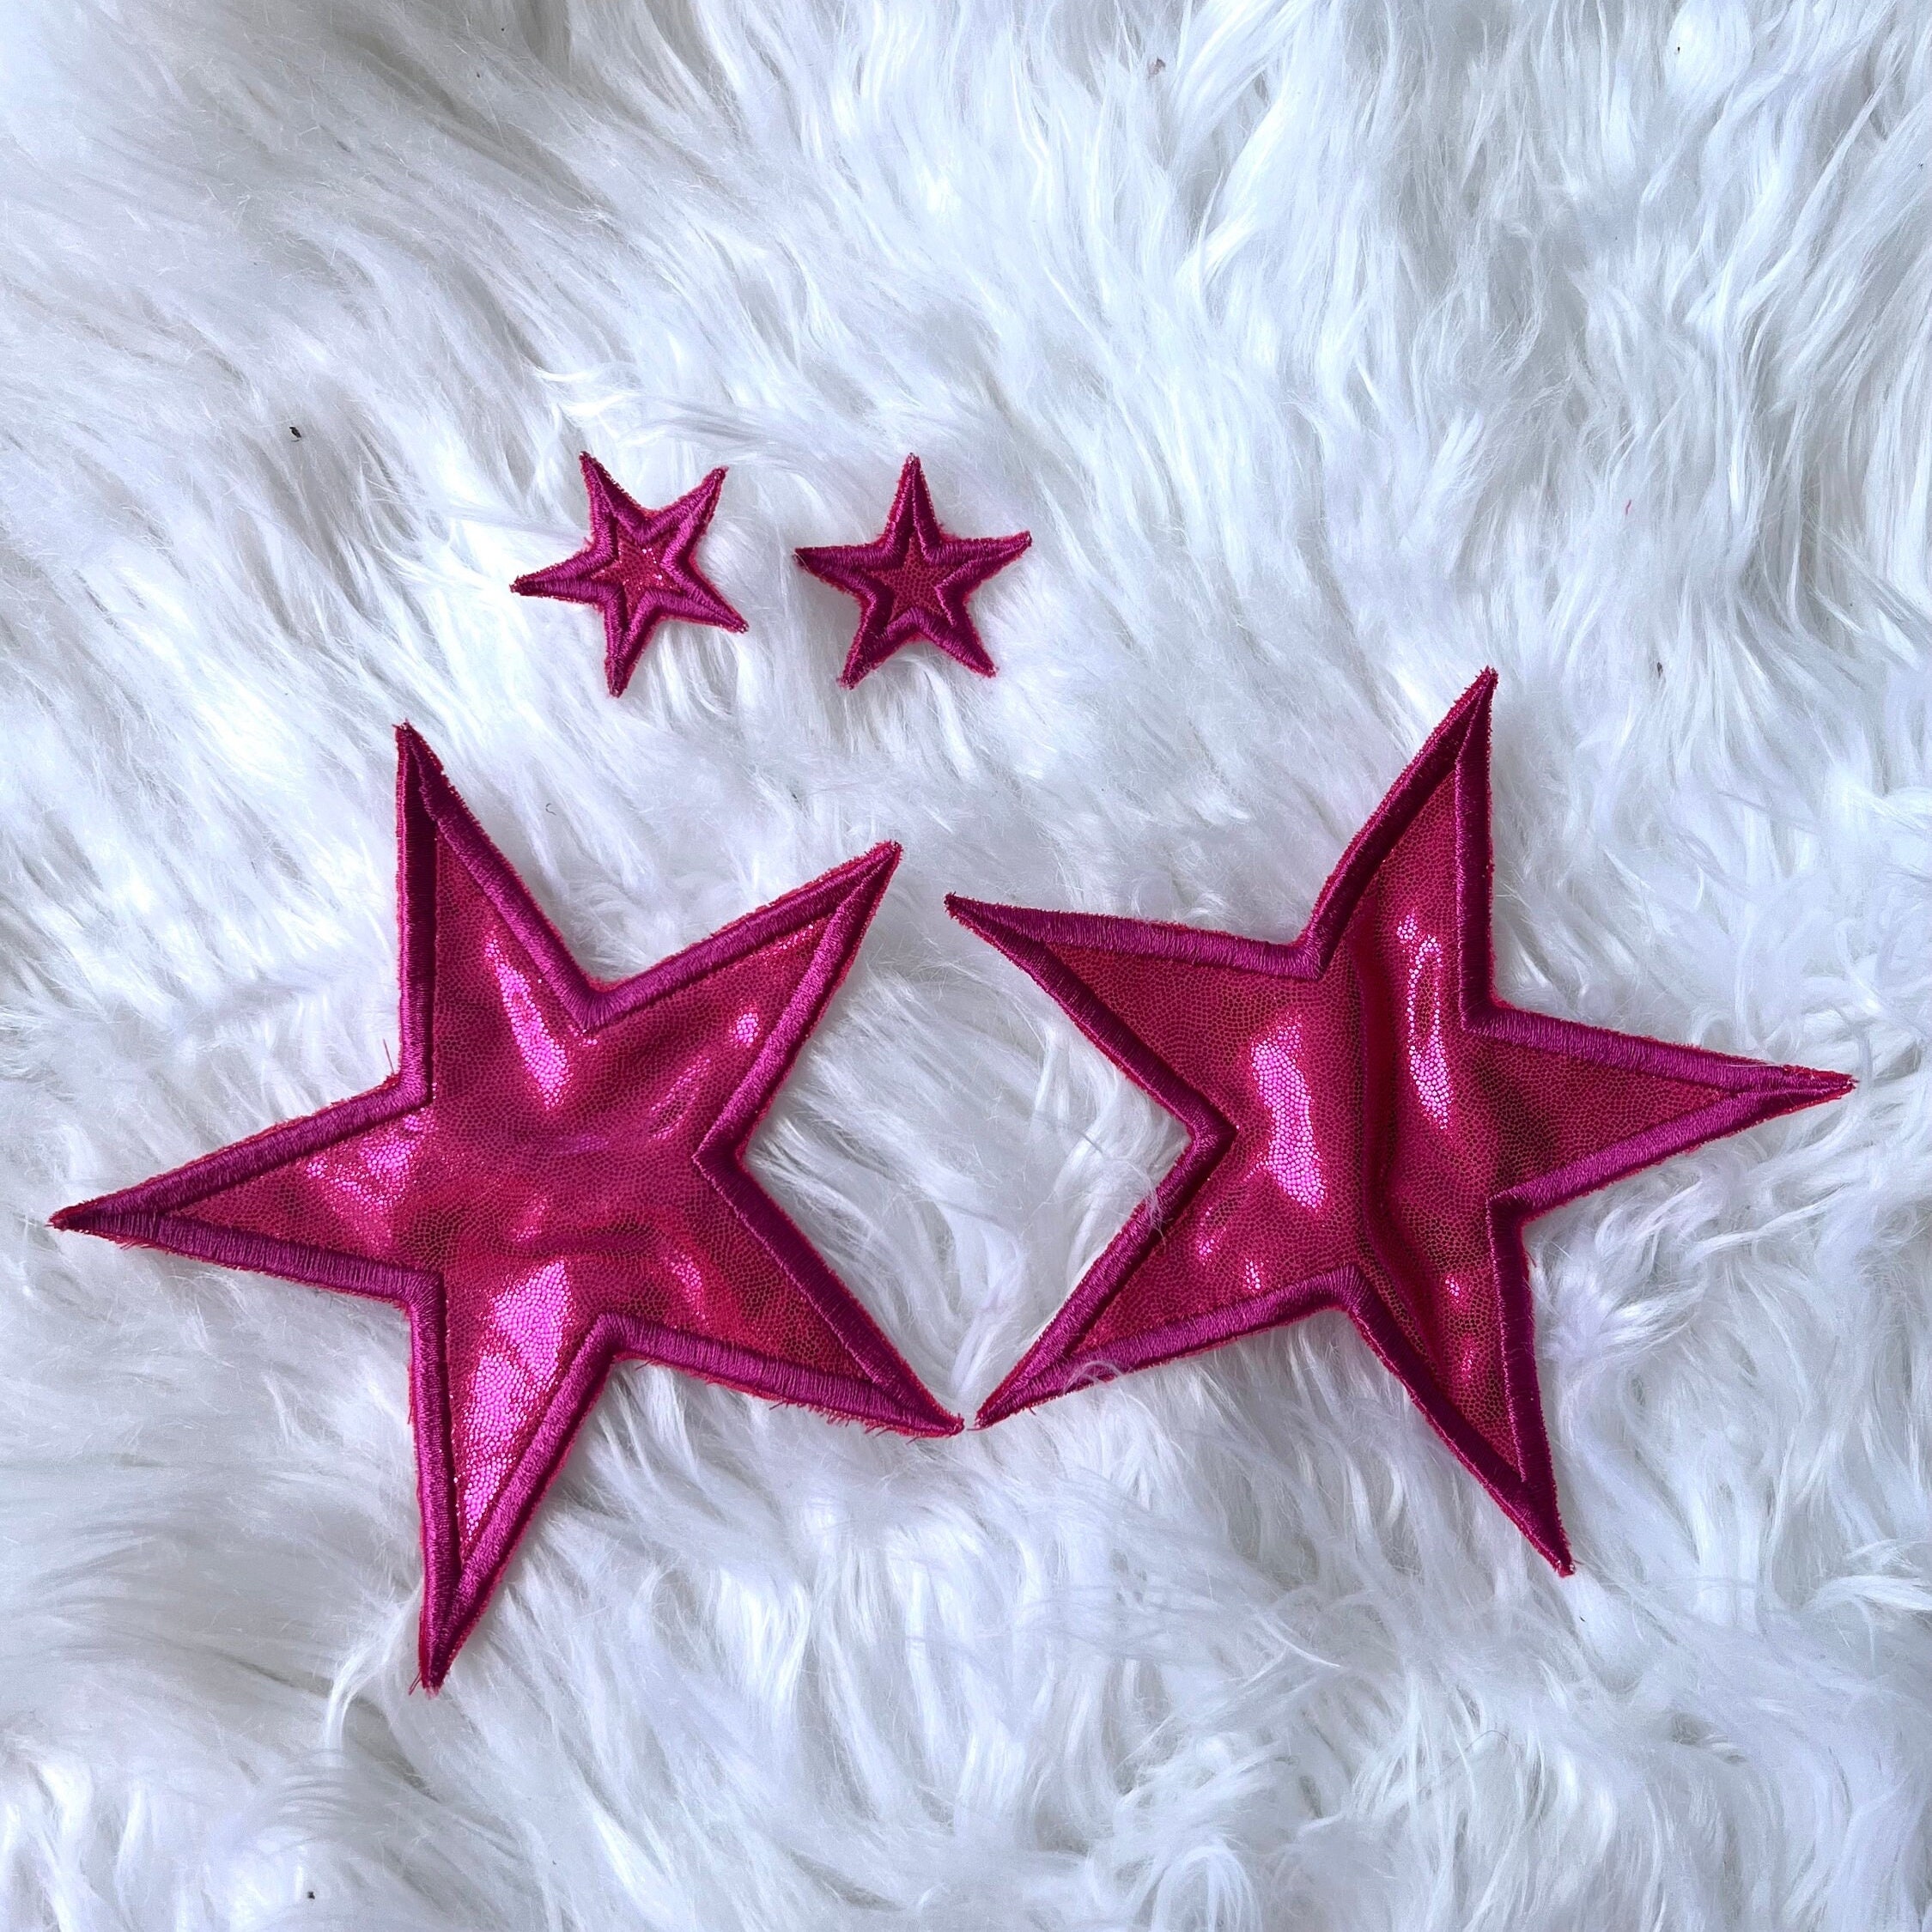 3 x 3 Pink Star Iron On Patches 2ct by hildie & jo